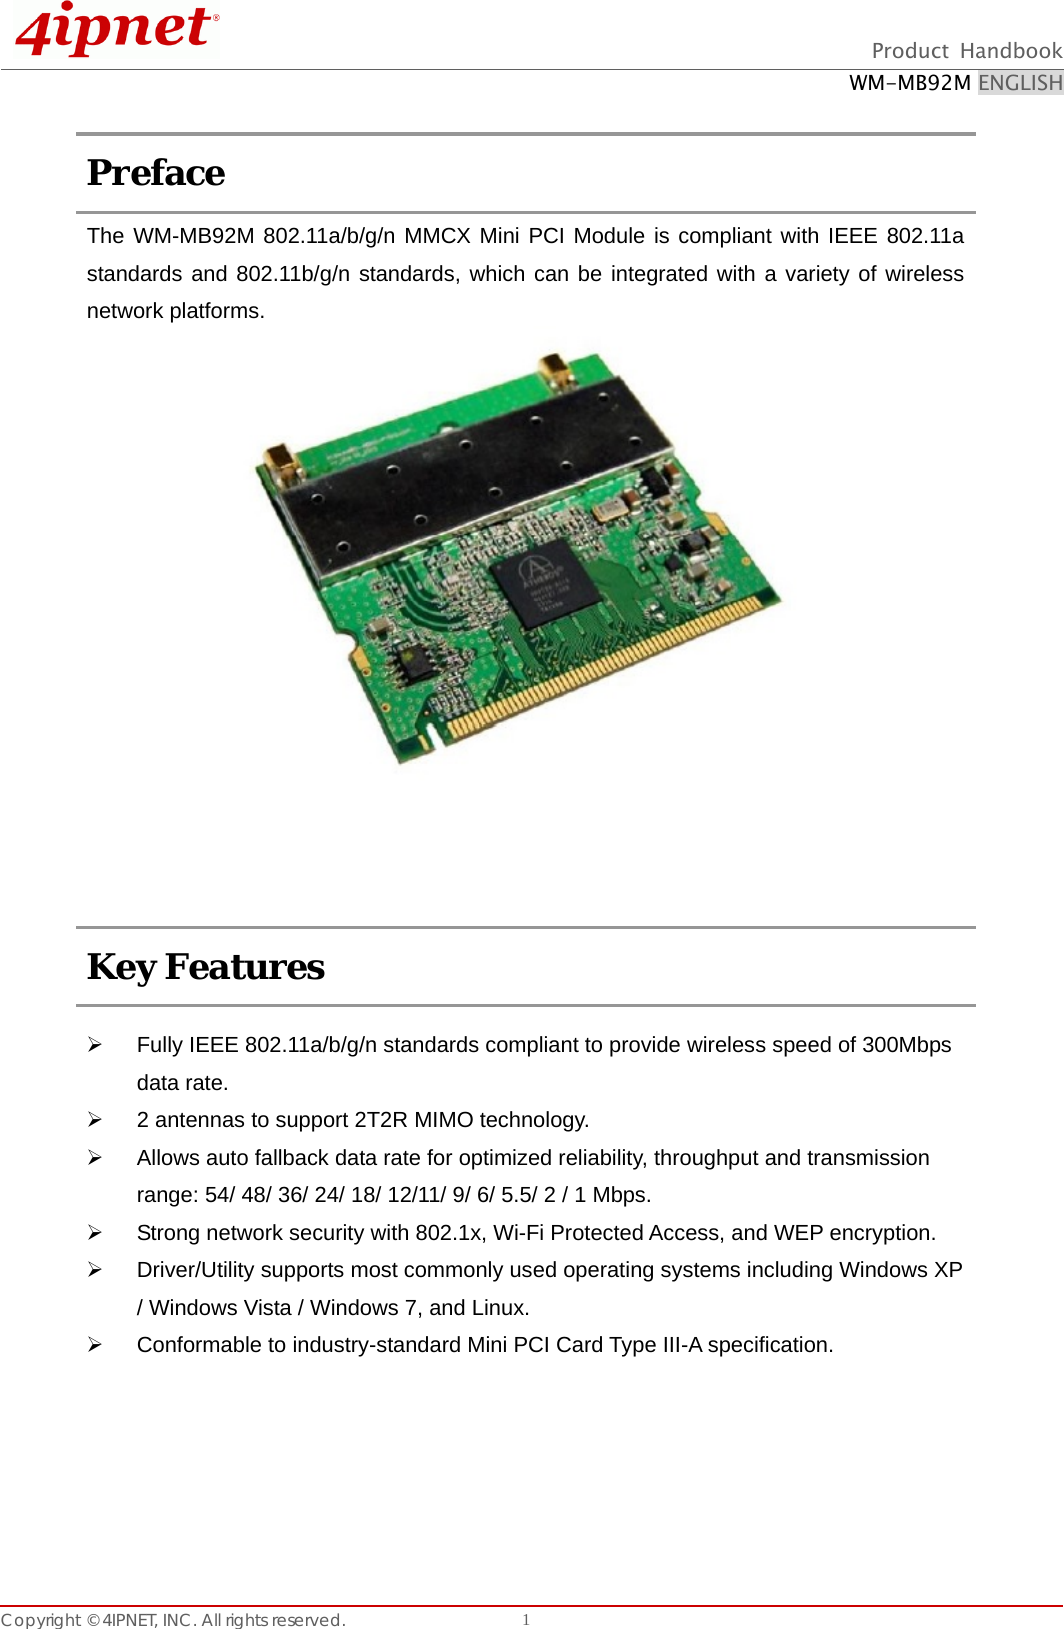  Product Handbook WM-MB92M ENGLISH Copyright © 4IPNET, INC. All rights reserved.    1 Preface   The WM-MB92M 802.11a/b/g/n MMCX Mini PCI Module is compliant with IEEE 802.11a standards and 802.11b/g/n standards, which can be integrated with a variety of wireless network platforms.                         Key Features    Fully IEEE 802.11a/b/g/n standards compliant to provide wireless speed of 300Mbps data rate.   2 antennas to support 2T2R MIMO technology.   Allows auto fallback data rate for optimized reliability, throughput and transmission range: 54/ 48/ 36/ 24/ 18/ 12/11/ 9/ 6/ 5.5/ 2 / 1 Mbps.   Strong network security with 802.1x, Wi-Fi Protected Access, and WEP encryption.   Driver/Utility supports most commonly used operating systems including Windows XP / Windows Vista / Windows 7, and Linux.   Conformable to industry-standard Mini PCI Card Type III-A specification.     